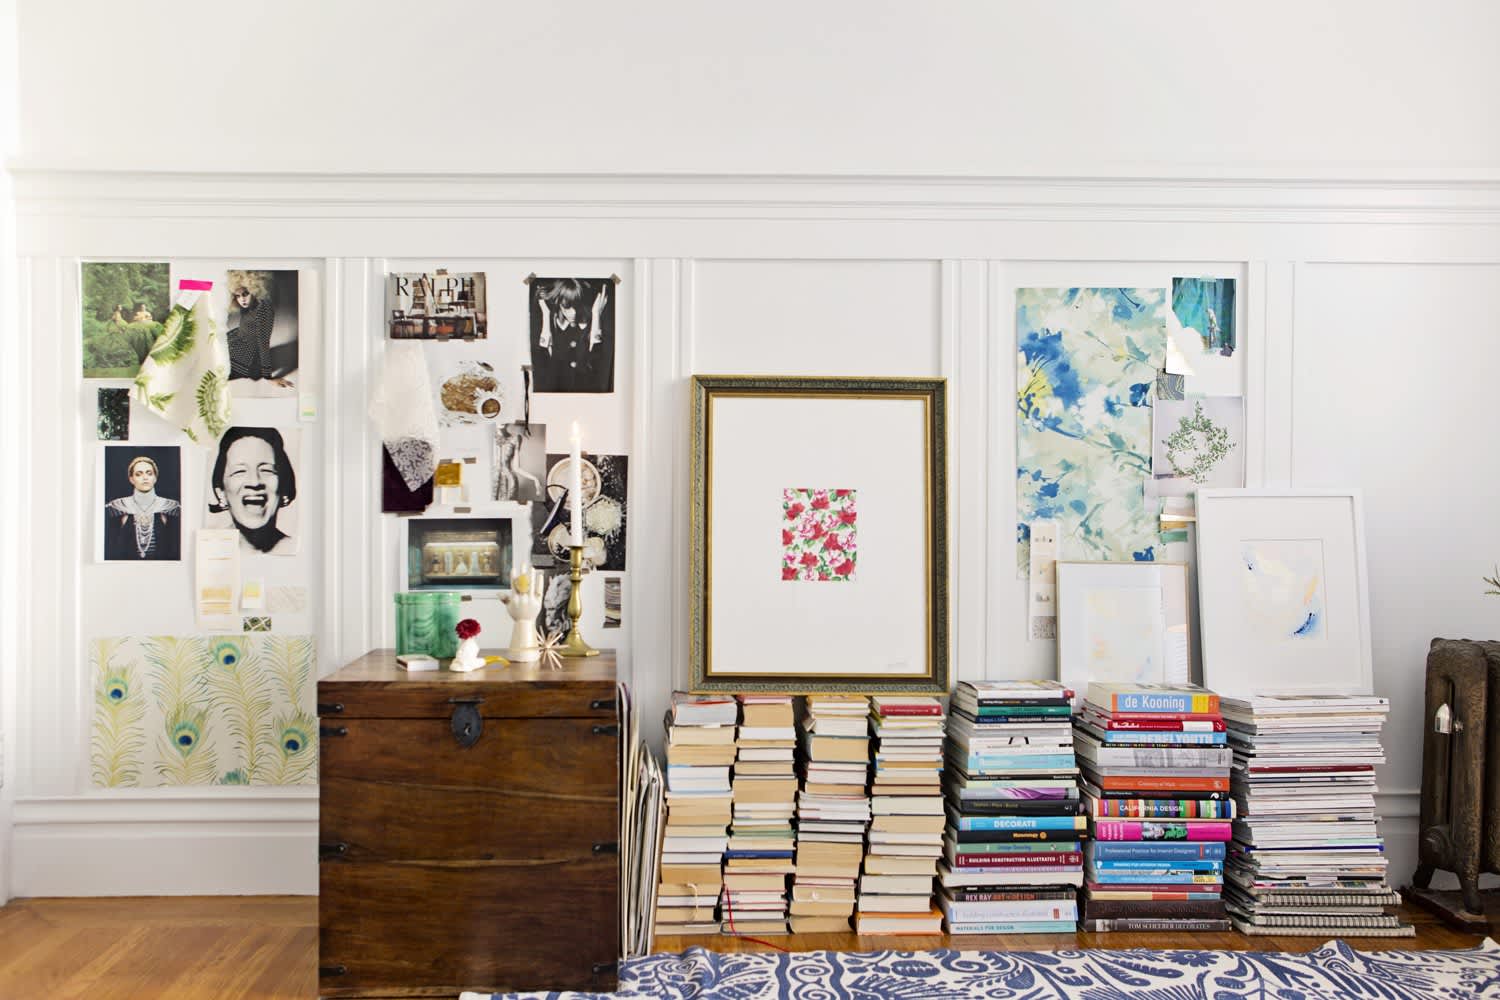 16 of the Very Best, Most Out-of-the-Box Art Displaying Ideas from Apartment Therapy House Tours